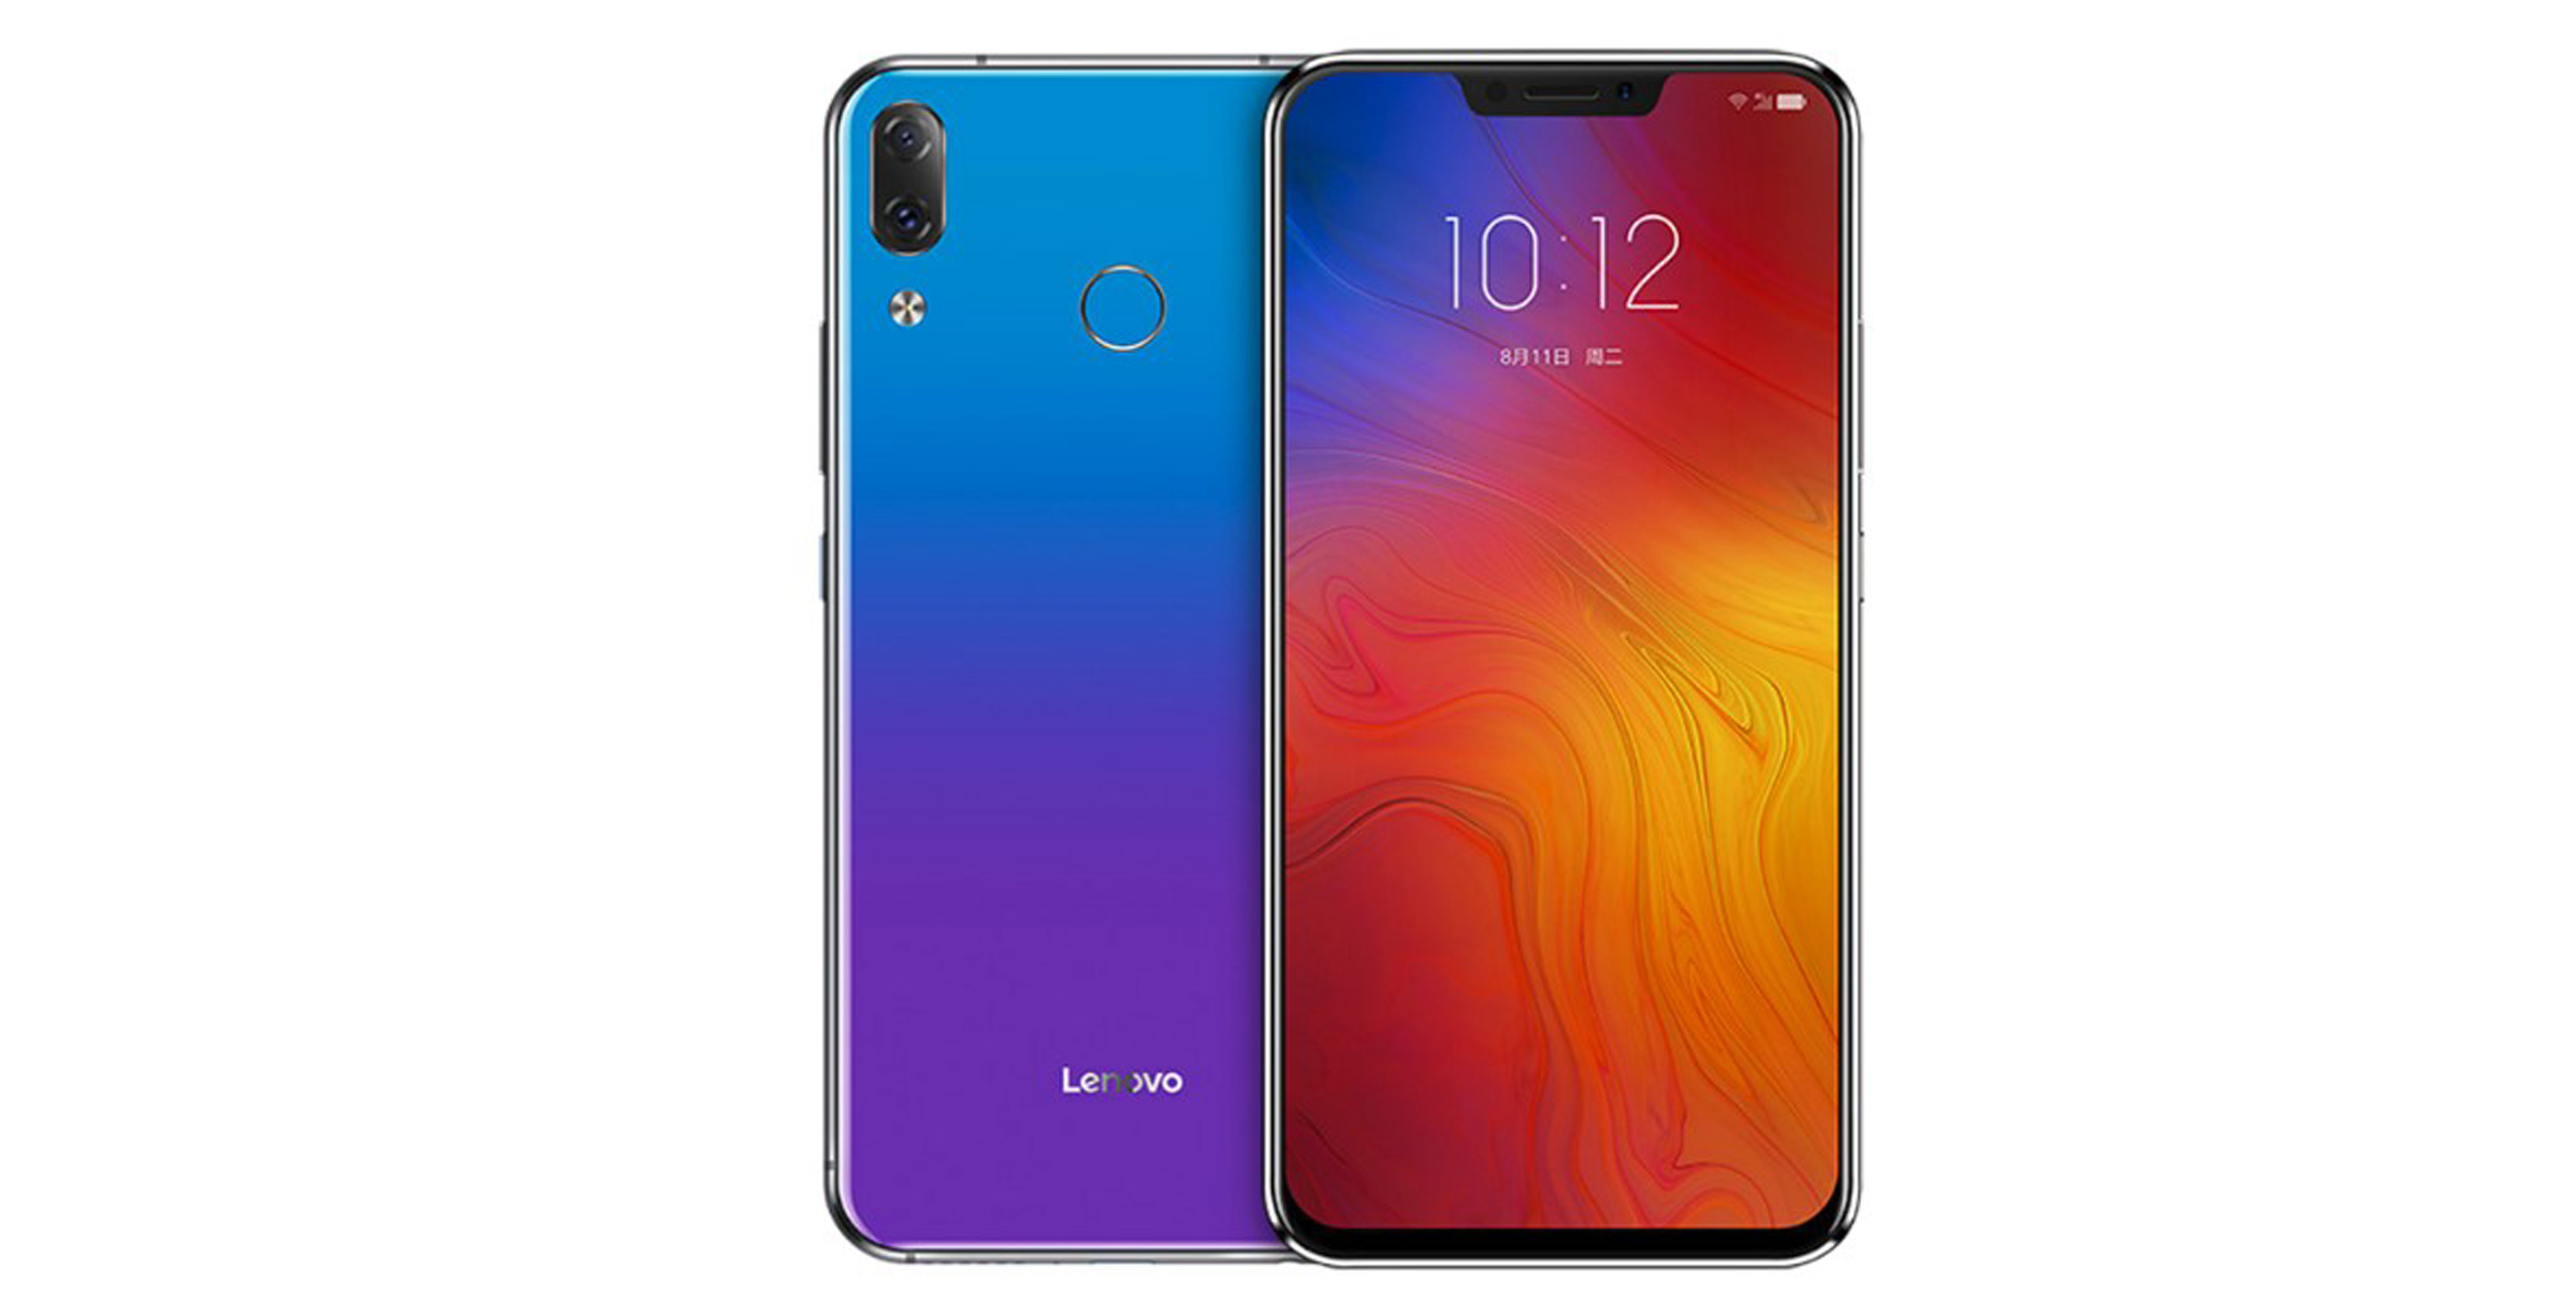 Lenovo's new Z5 smartphone features a notch and chin like a lot of Android smartphones